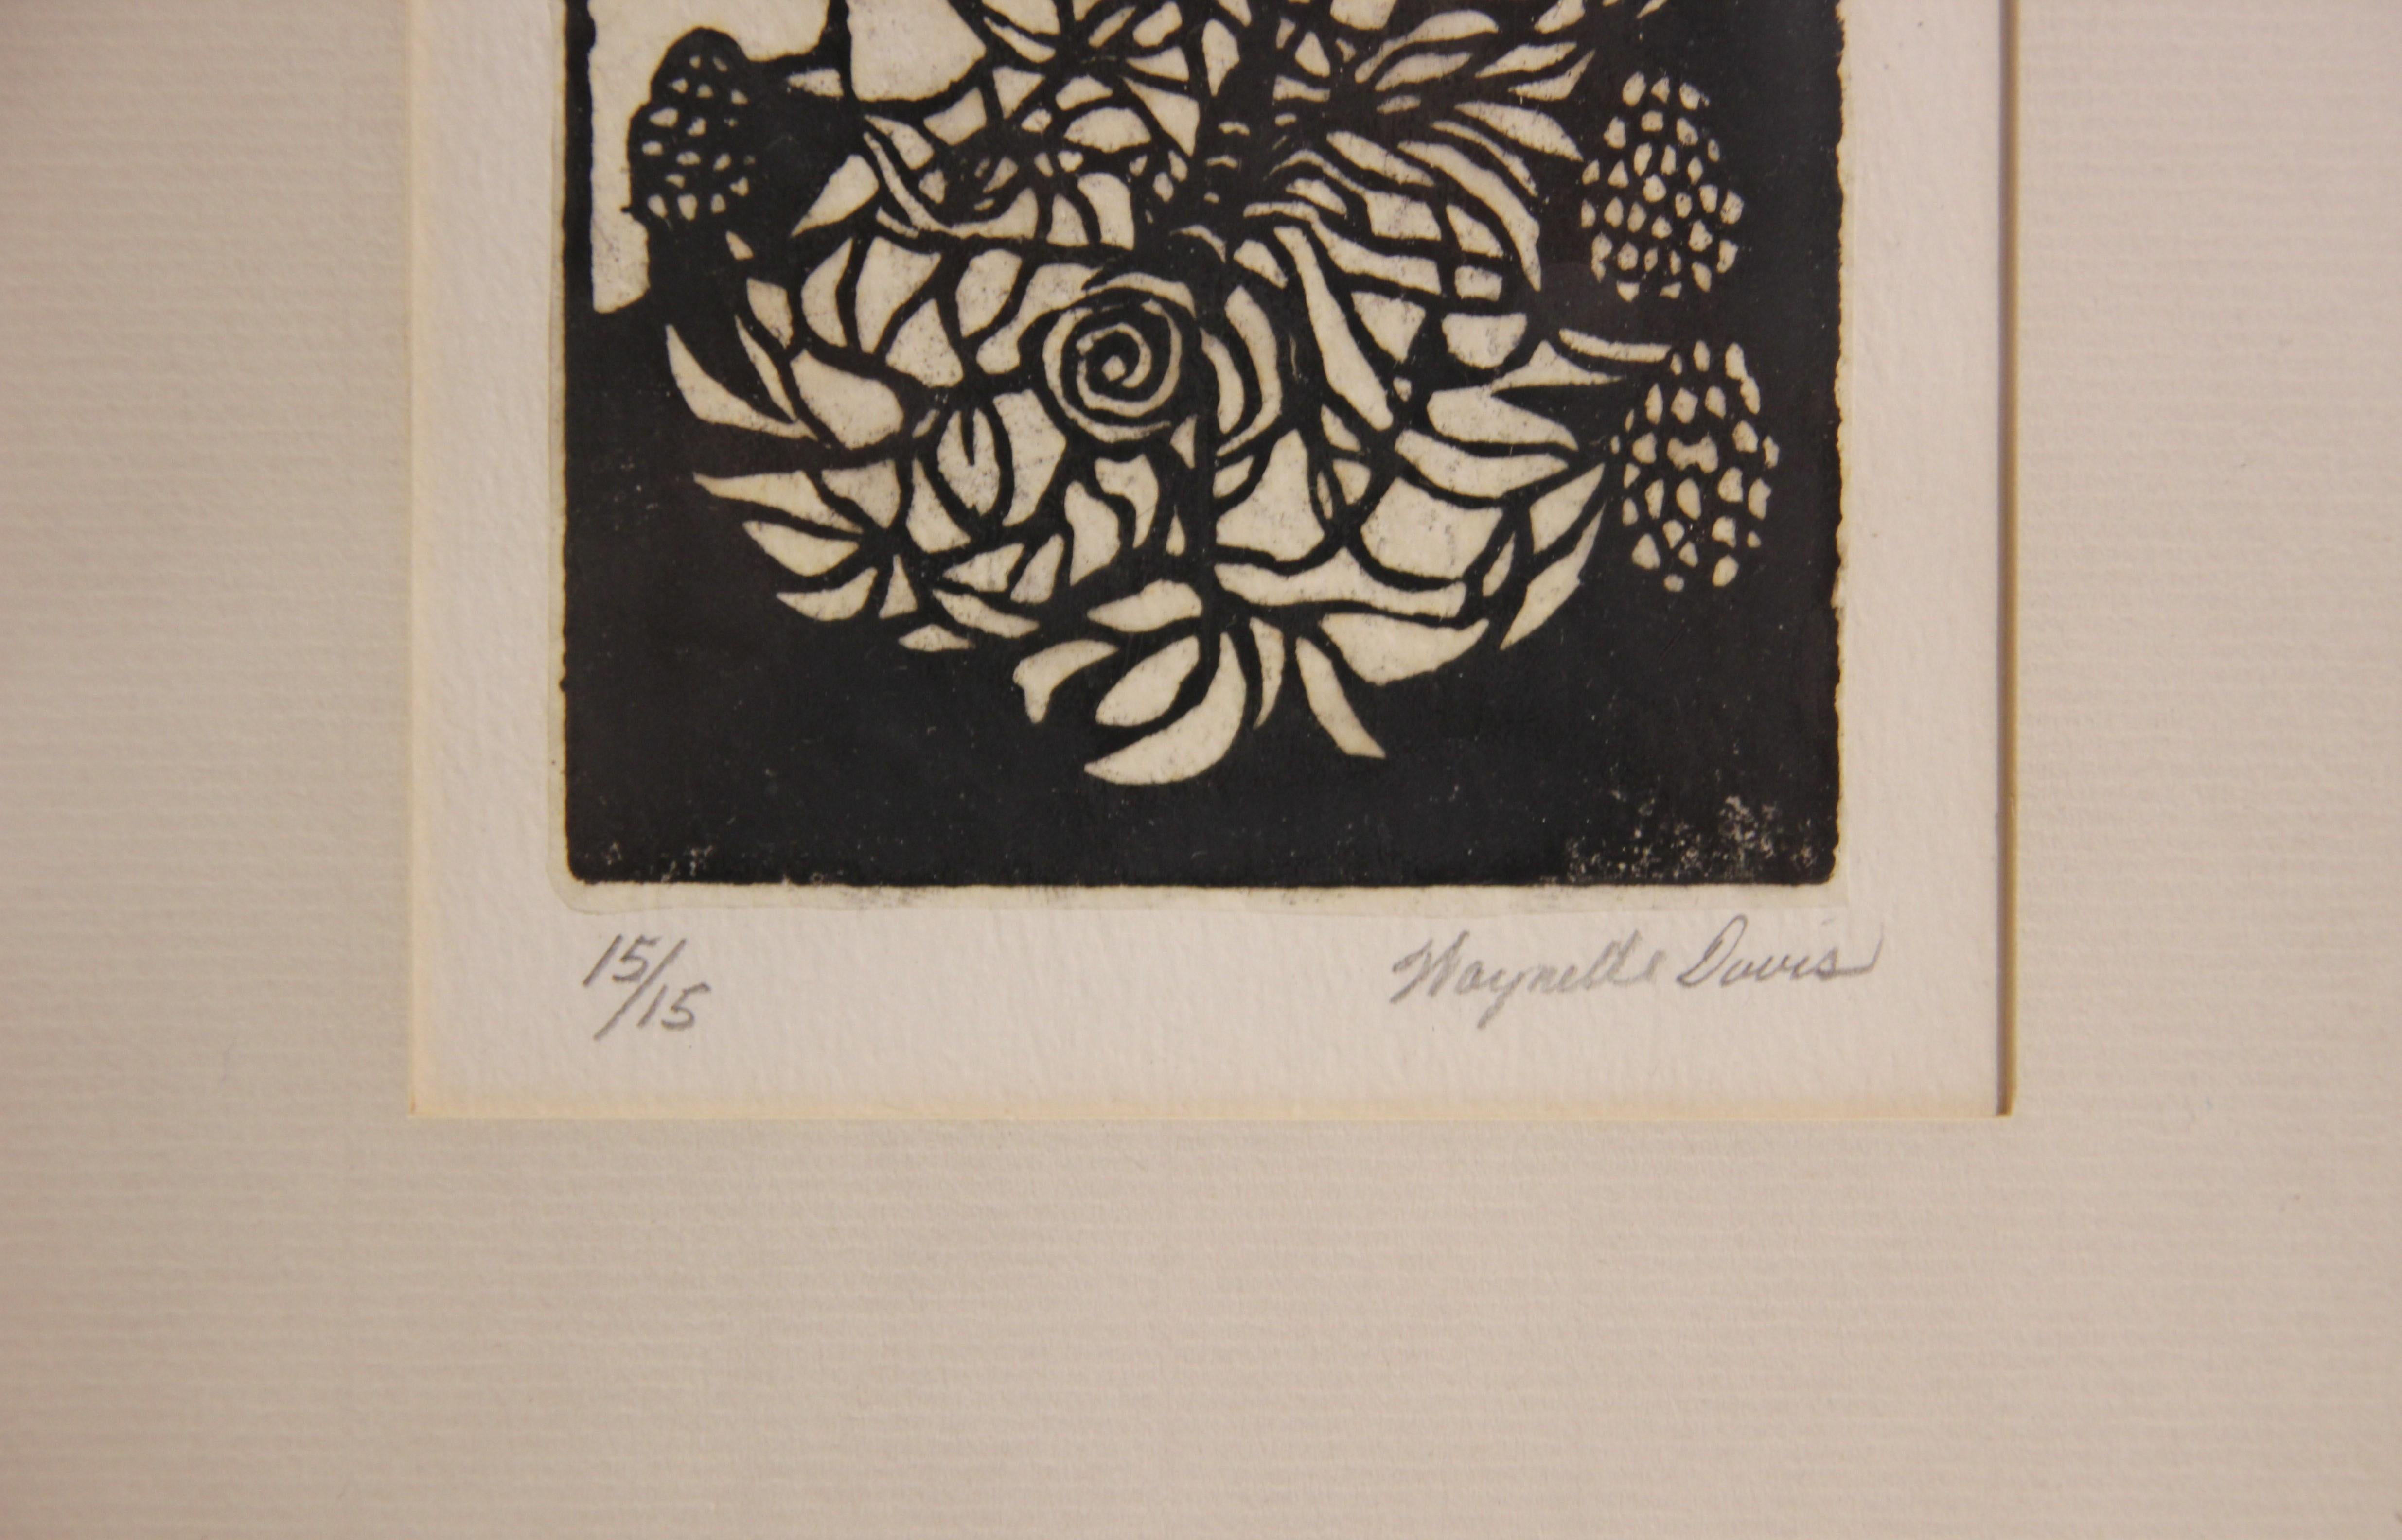 Abstract black and white floral still life lithograph print by Waynelle Davis. Editioned (15/15) and signed by the artist at the bottom of the print. Currently displayed in a black frame with a white matte. 

Dimensions Without Frame: H 5 in. x W